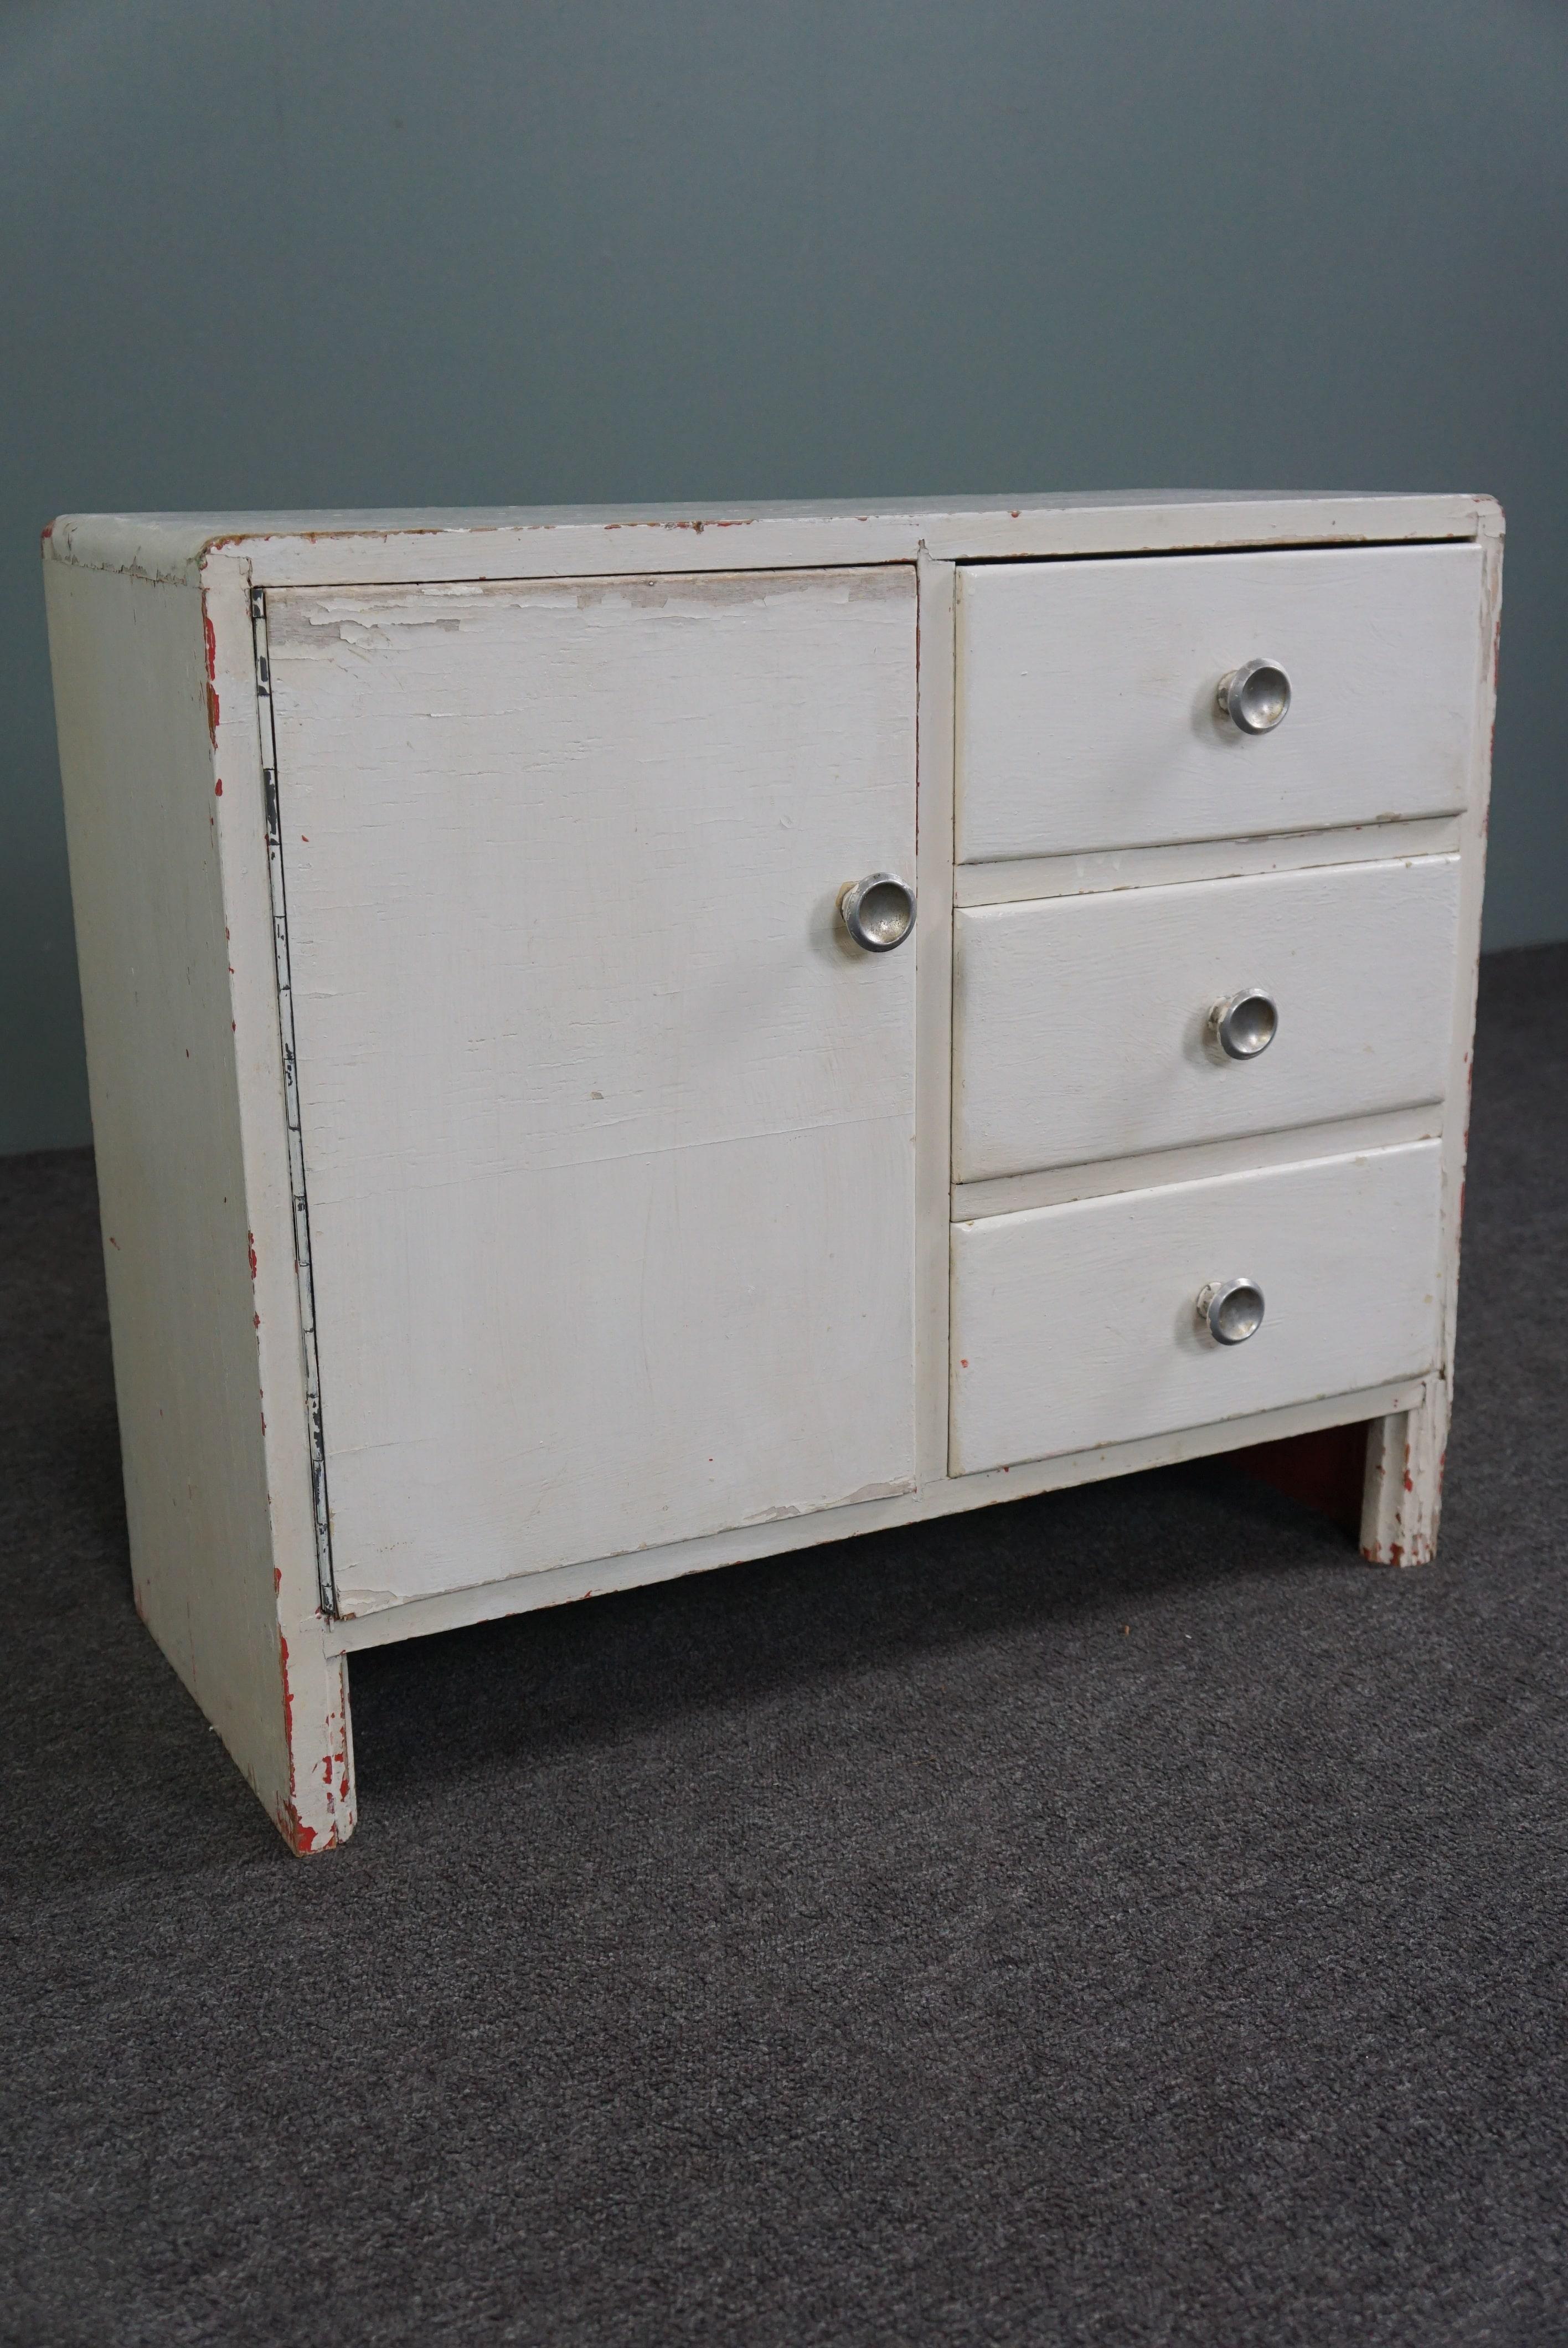 With its striking white color and sturdy character, this cupboard is a literal eye-catcher in your interior. This beautiful unique piece of furniture is in a used condition, which we think only gives it even more charm.

NB:
The dimensions mentioned